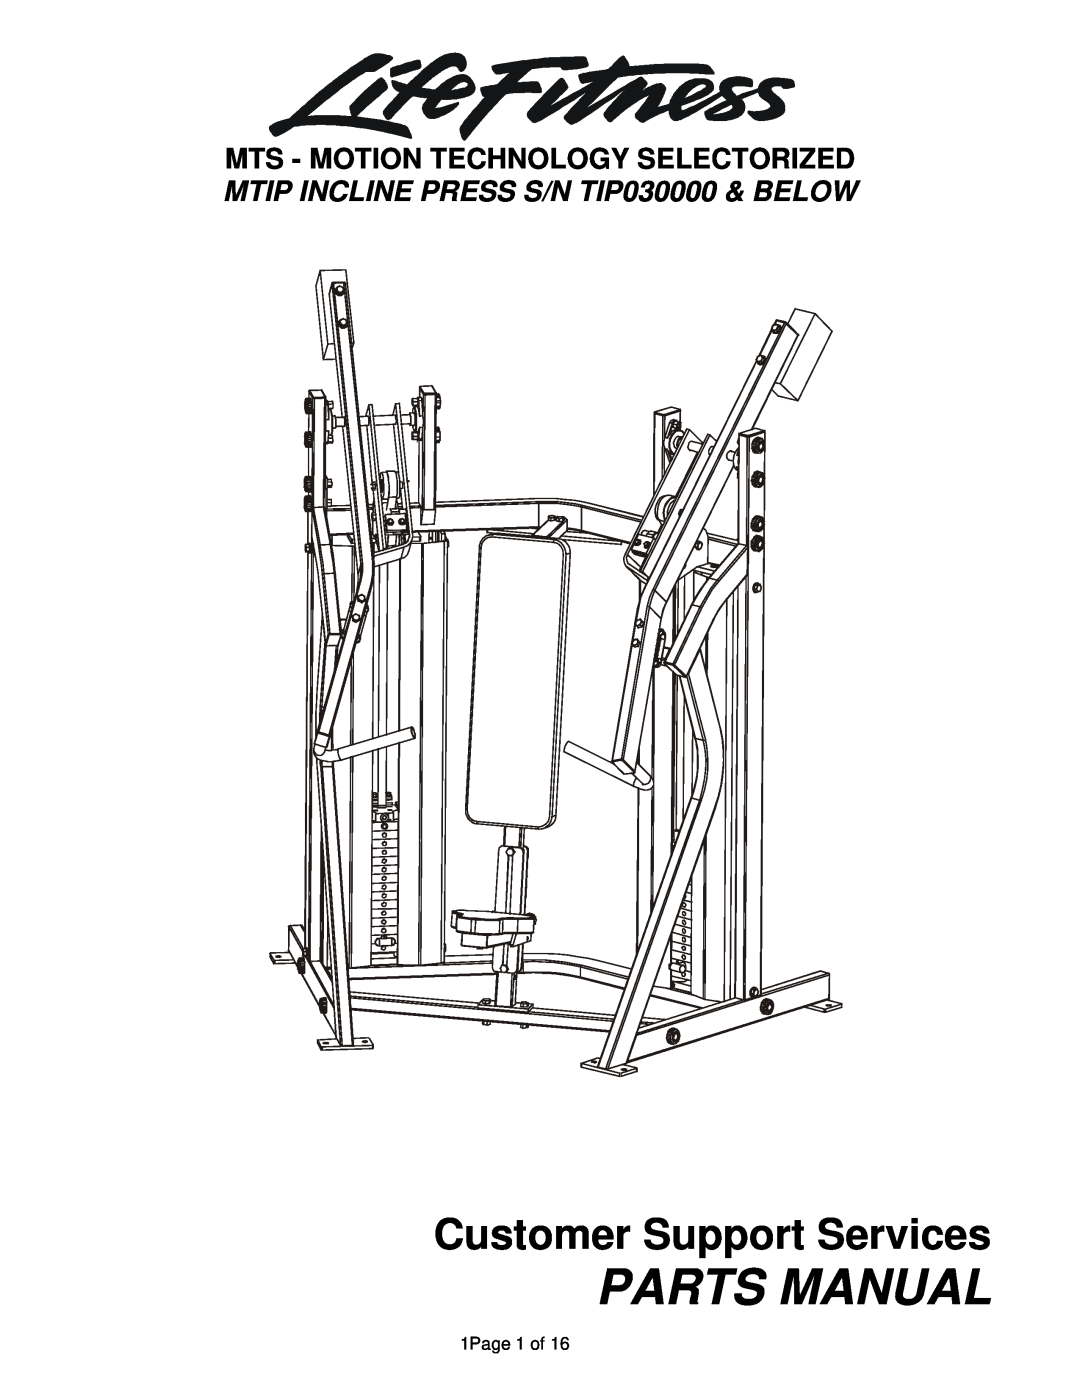 Life Fitness MTIP manual Parts Manual, Customer Support Services, 1Page 1 of 